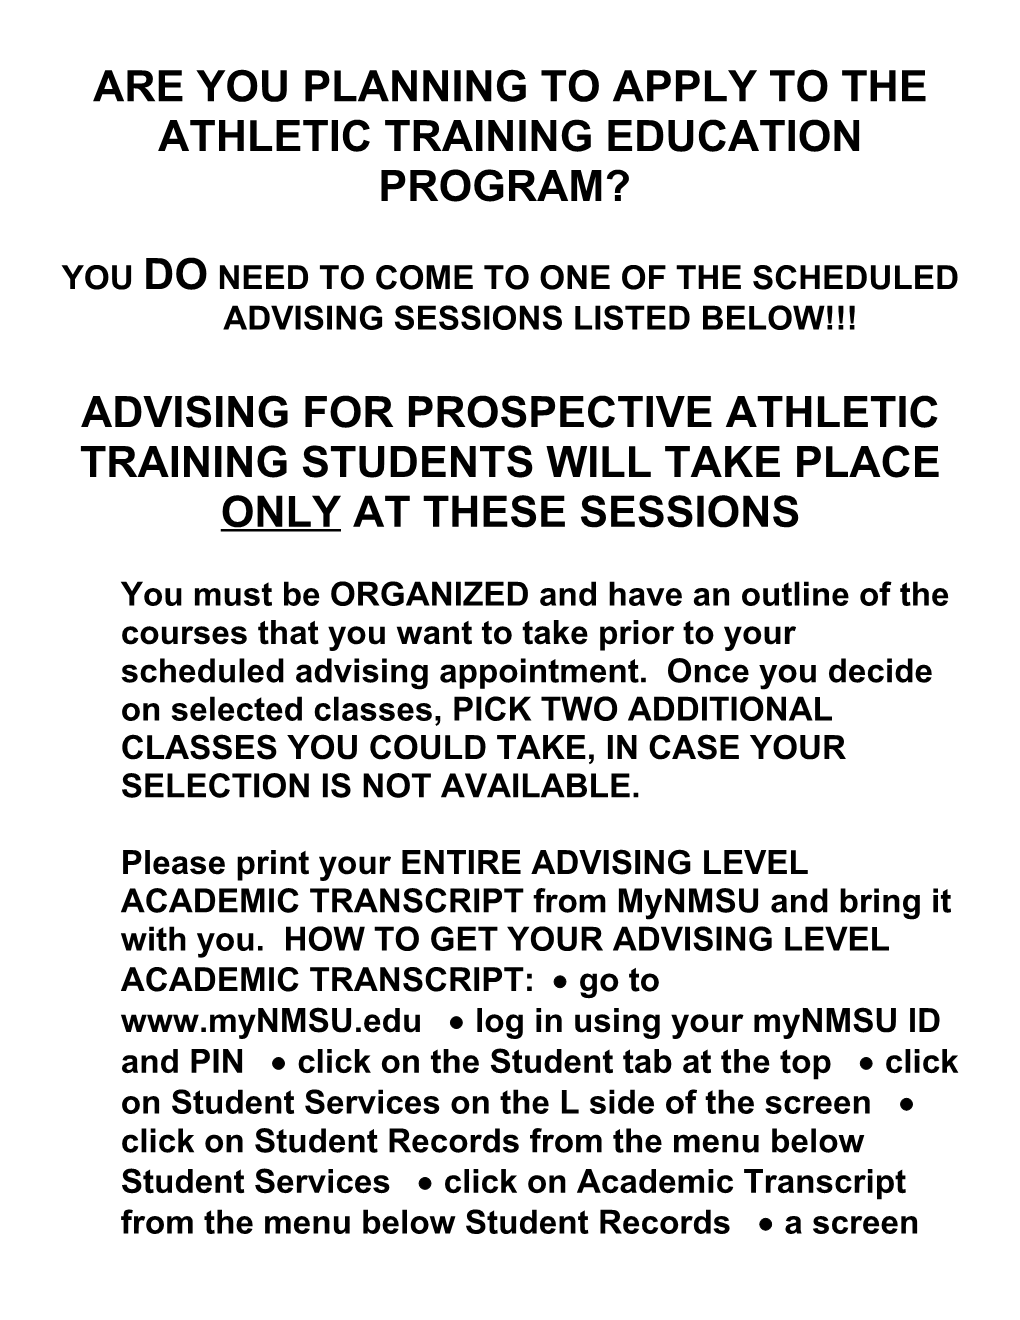 Are You Planning to Apply to the Athletic Training Education Program in Spring 2001 Or